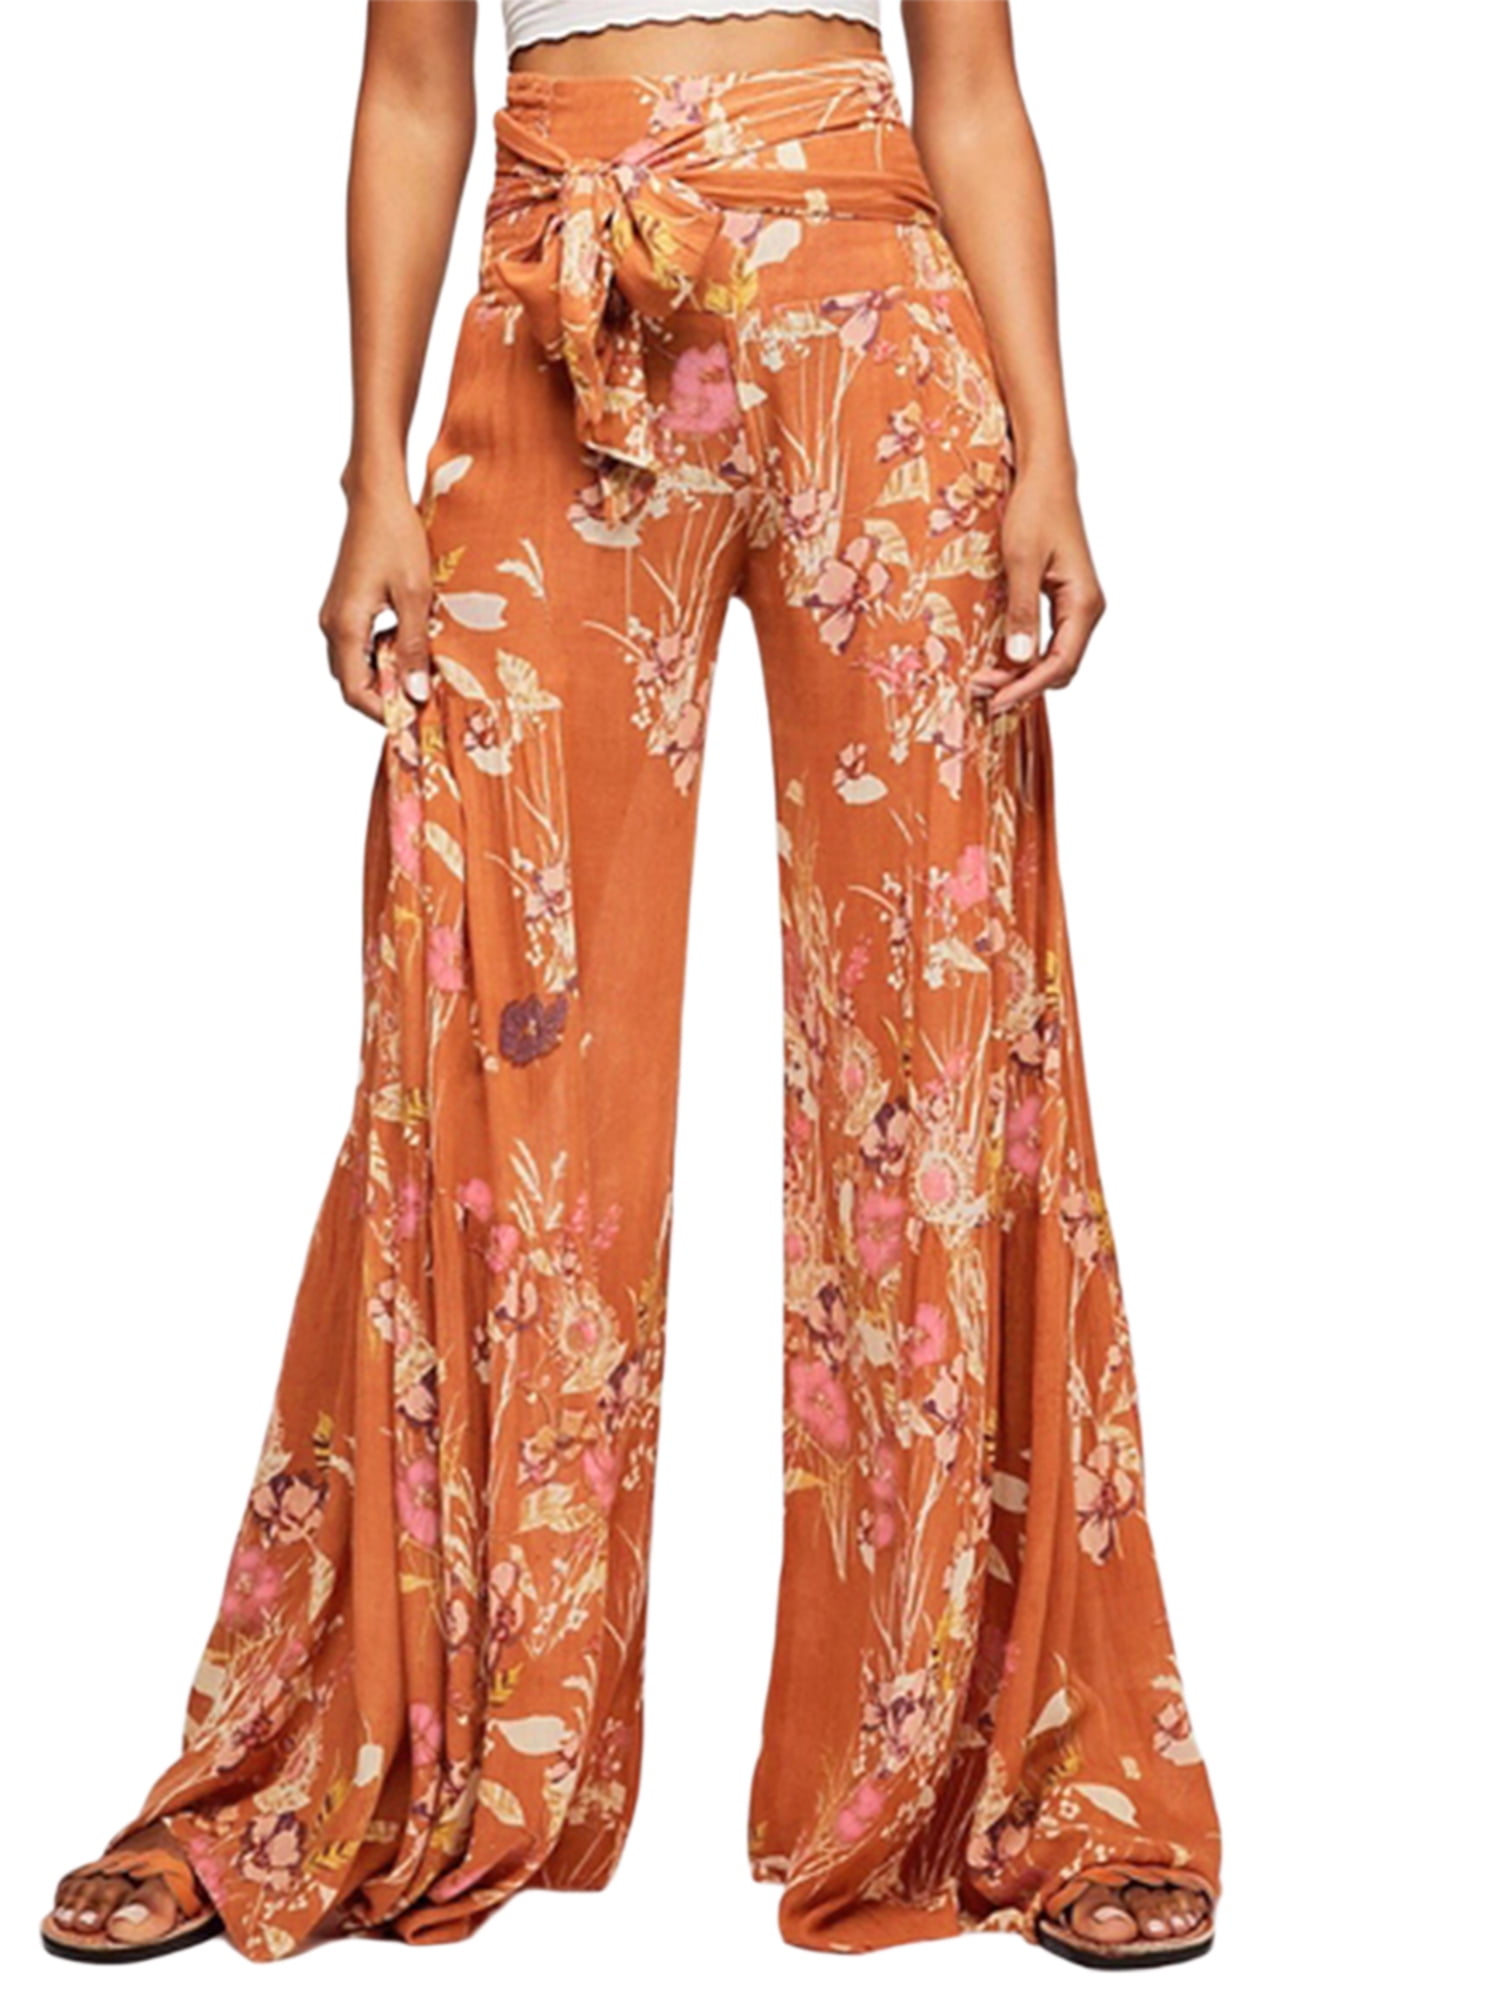 Summer Wide Leg Elastic Waist Pants, Women's Casual Summer Pants Floral  Beach Pants High Waist Boho Pants with Pockets Prime Deals Of The Day Today  Only Tiny Homes For Sale #3 